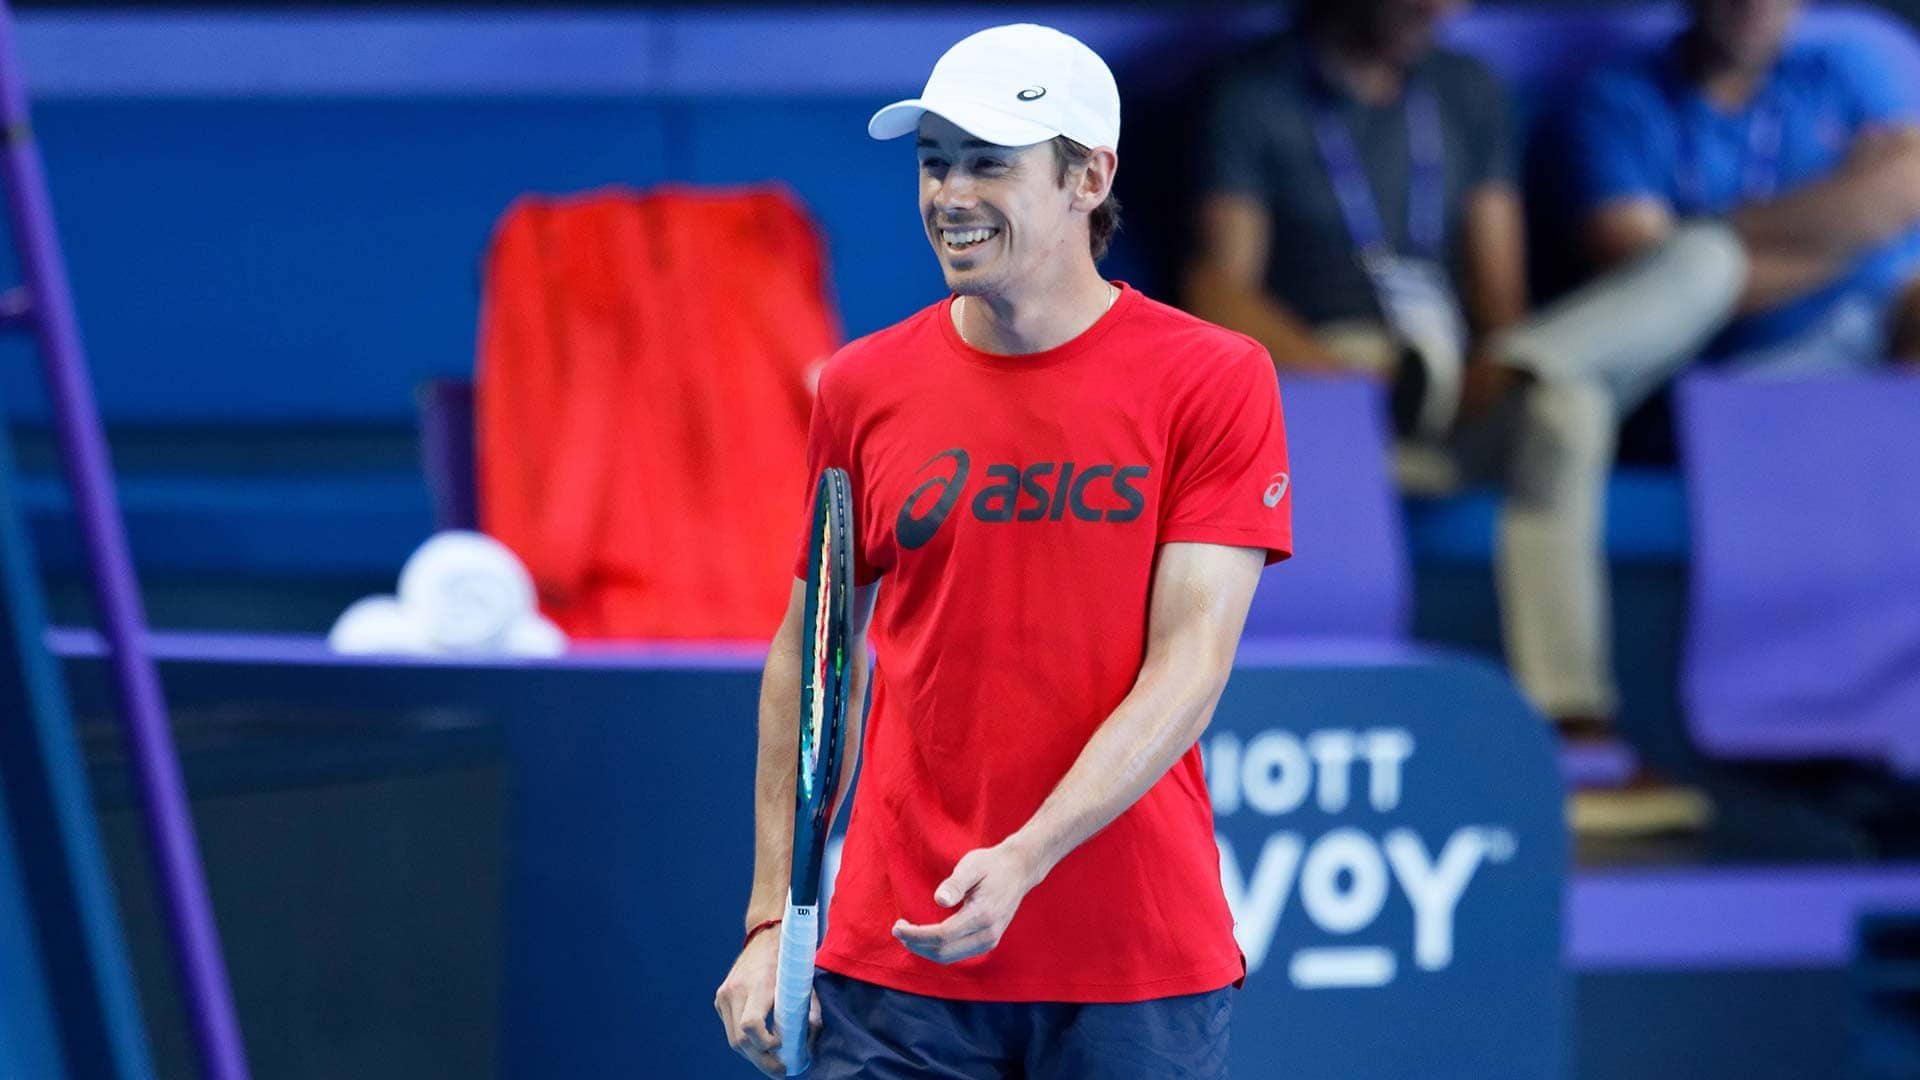 Australian Alex de Minaur will face British lefty Cameron Norrie on Friday at the United Cup.